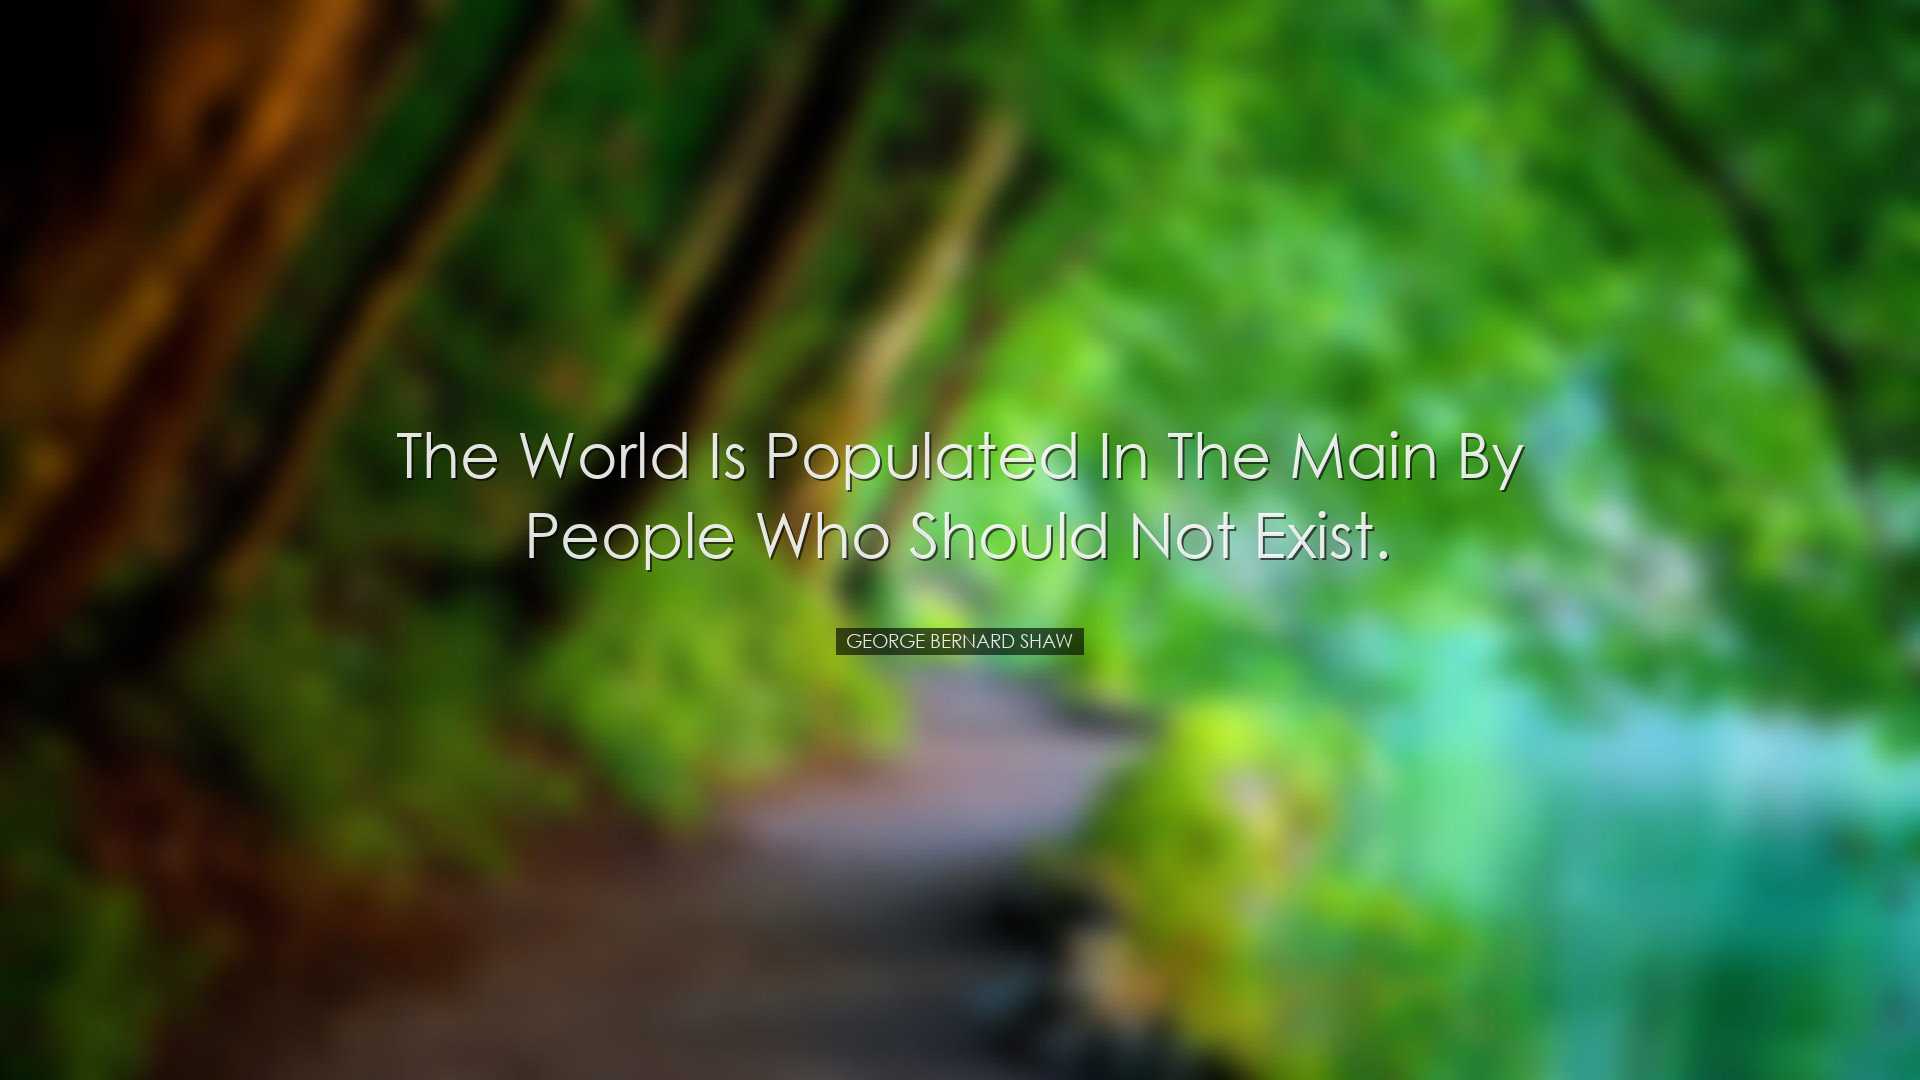 The world is populated in the main by people who should not exist.